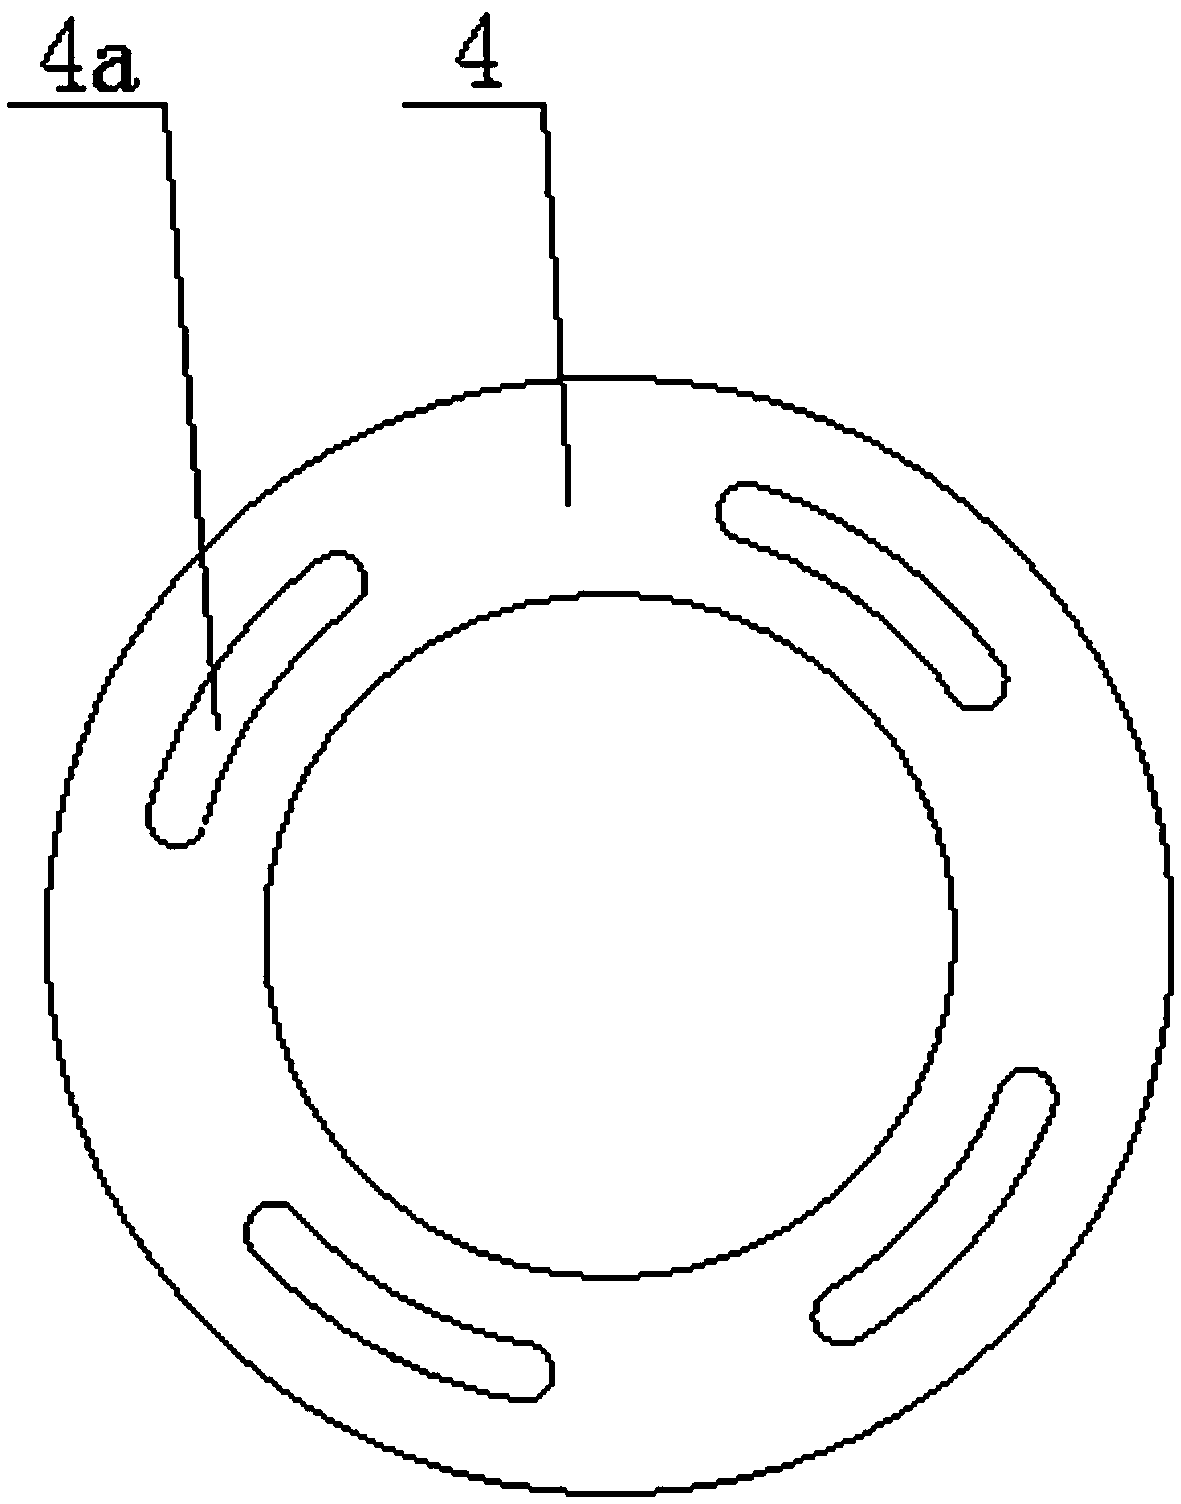 A high-efficiency sealing flange